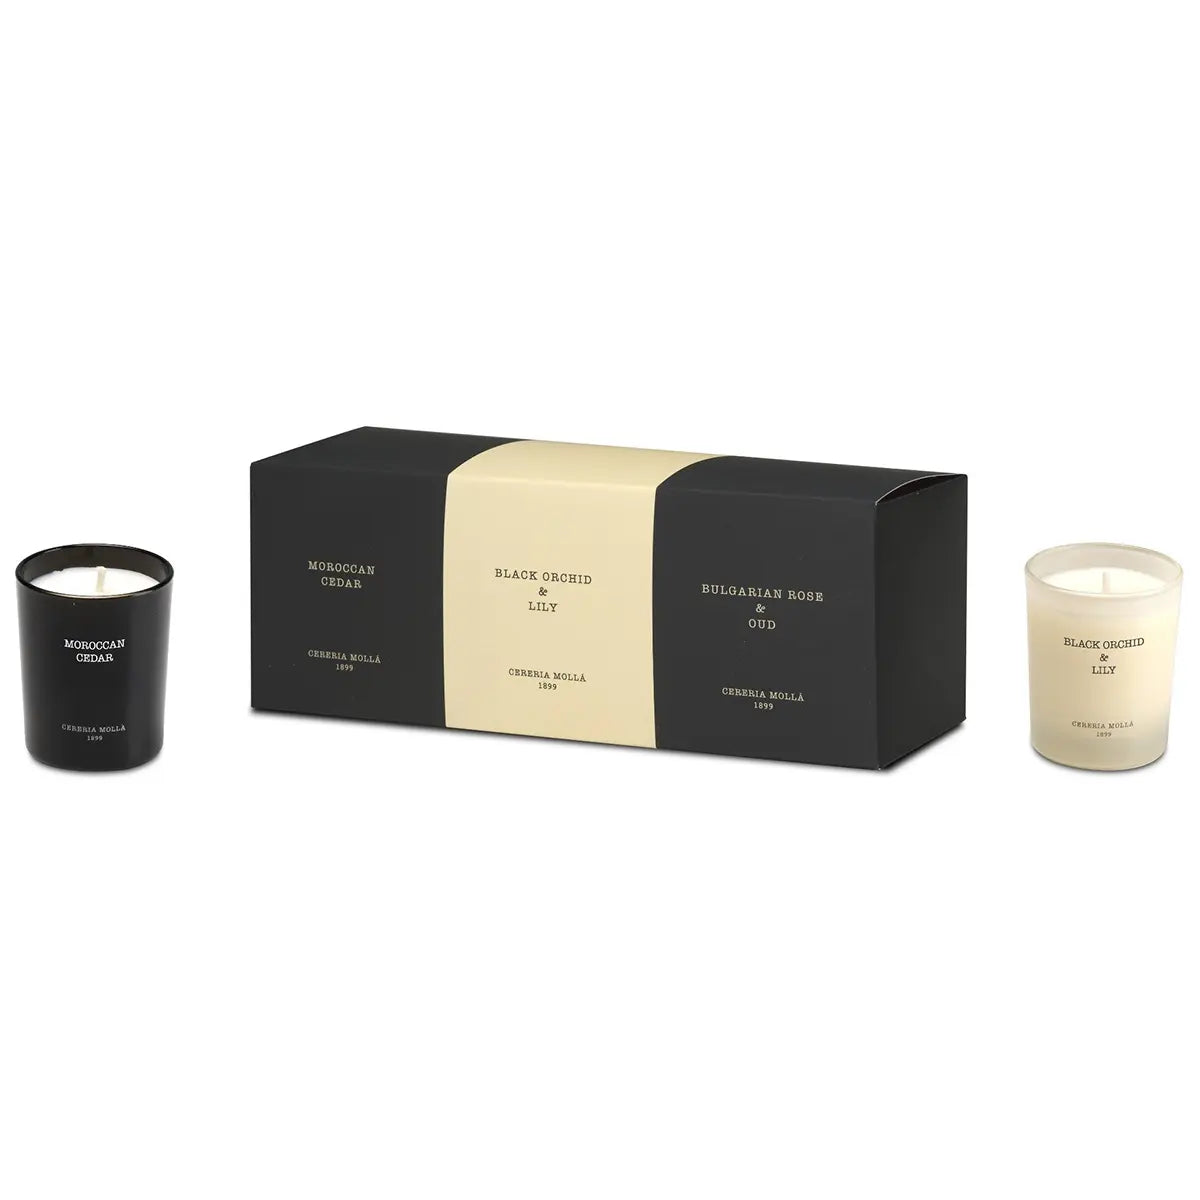 Cereria Molla 3 Votive Luxury Candle Gift Set with Bulgarian Rose, Black Orchid and Lily, Moroccan Cedar